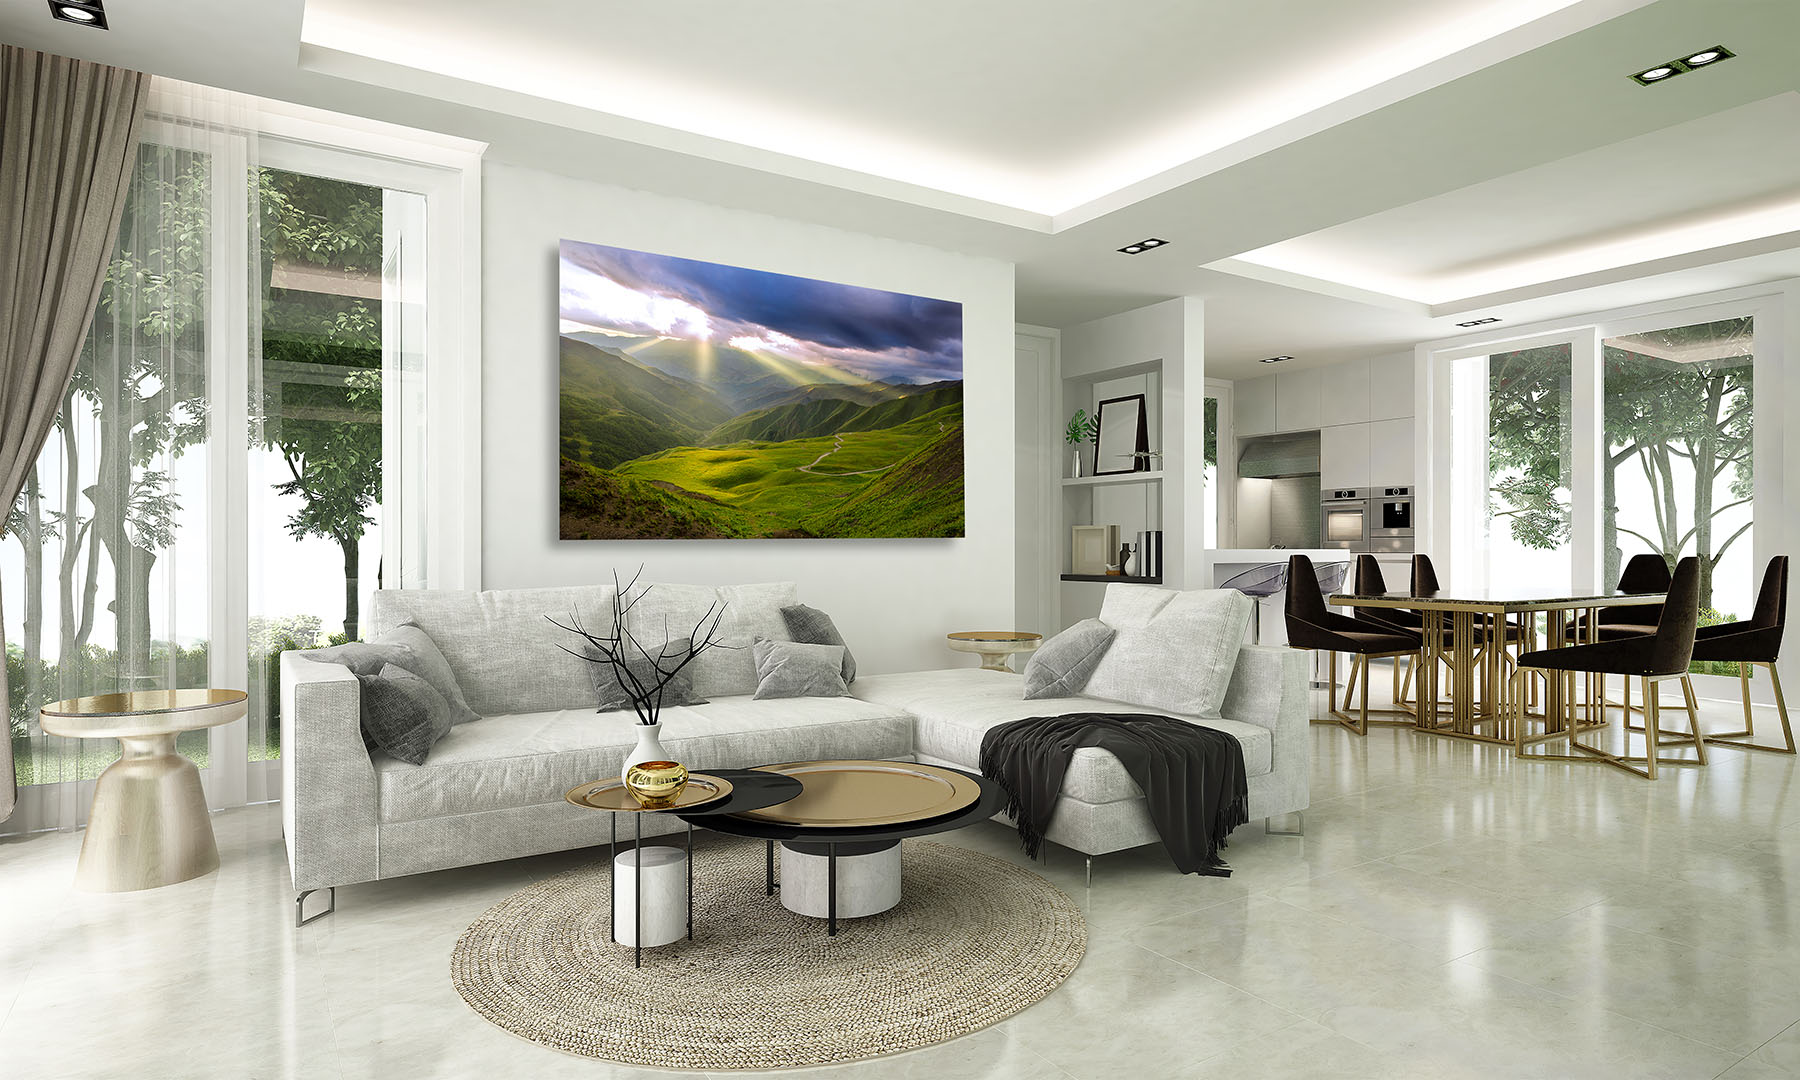 A home displaying Jason Ferrell photography prints on the wall.   This is an example of the interior design services I offer...